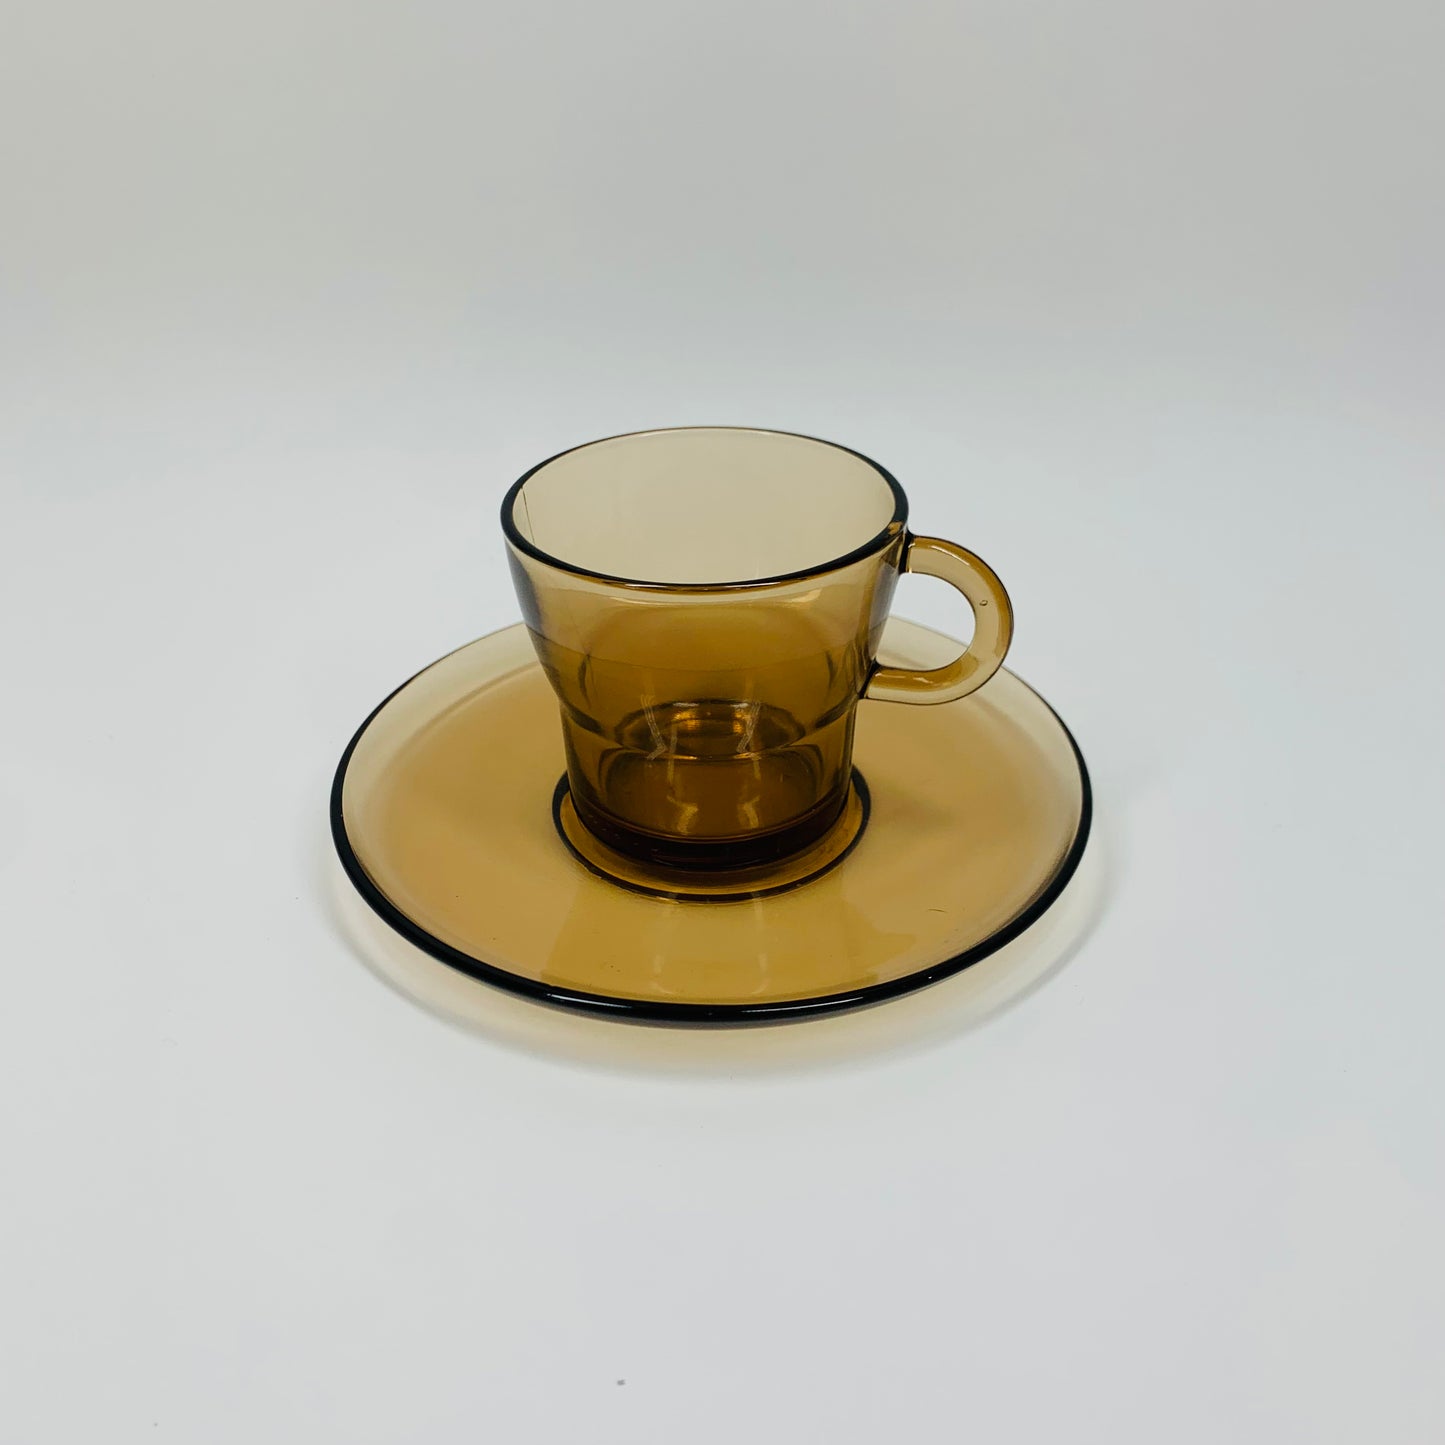 Vintage brown Duralex glass espresso cup and matching saucer